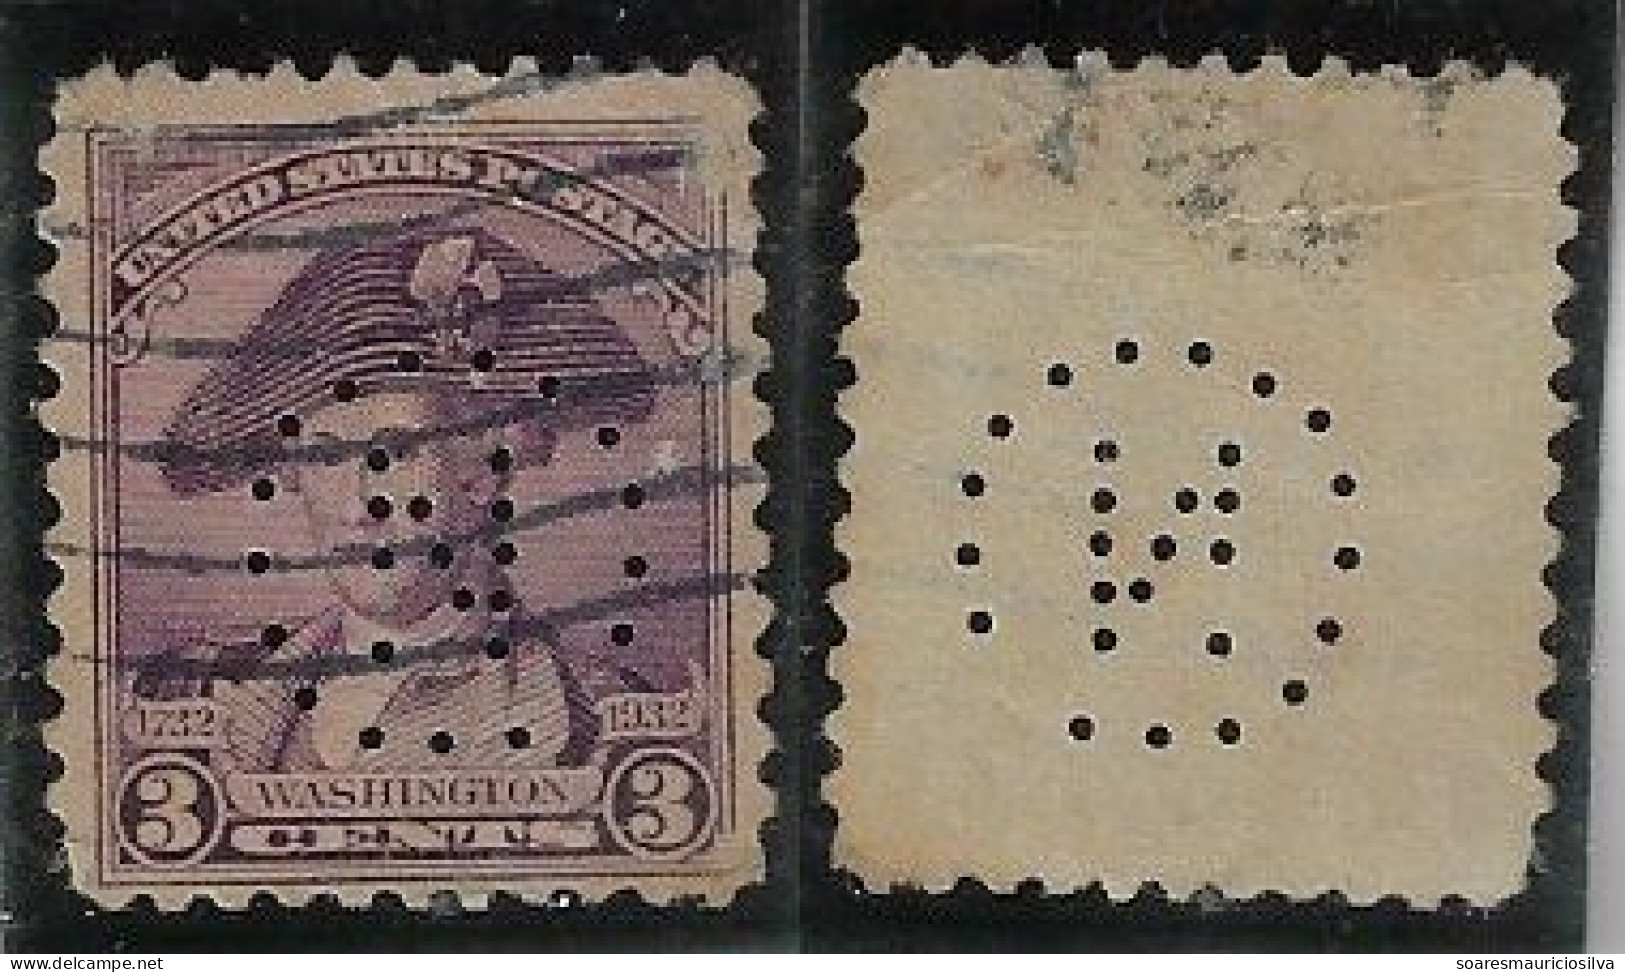 USA United States 1926/1965 Stamp With Perfin N (Circle) By Norton Company From Worcester Lochung Perfore - Perforés